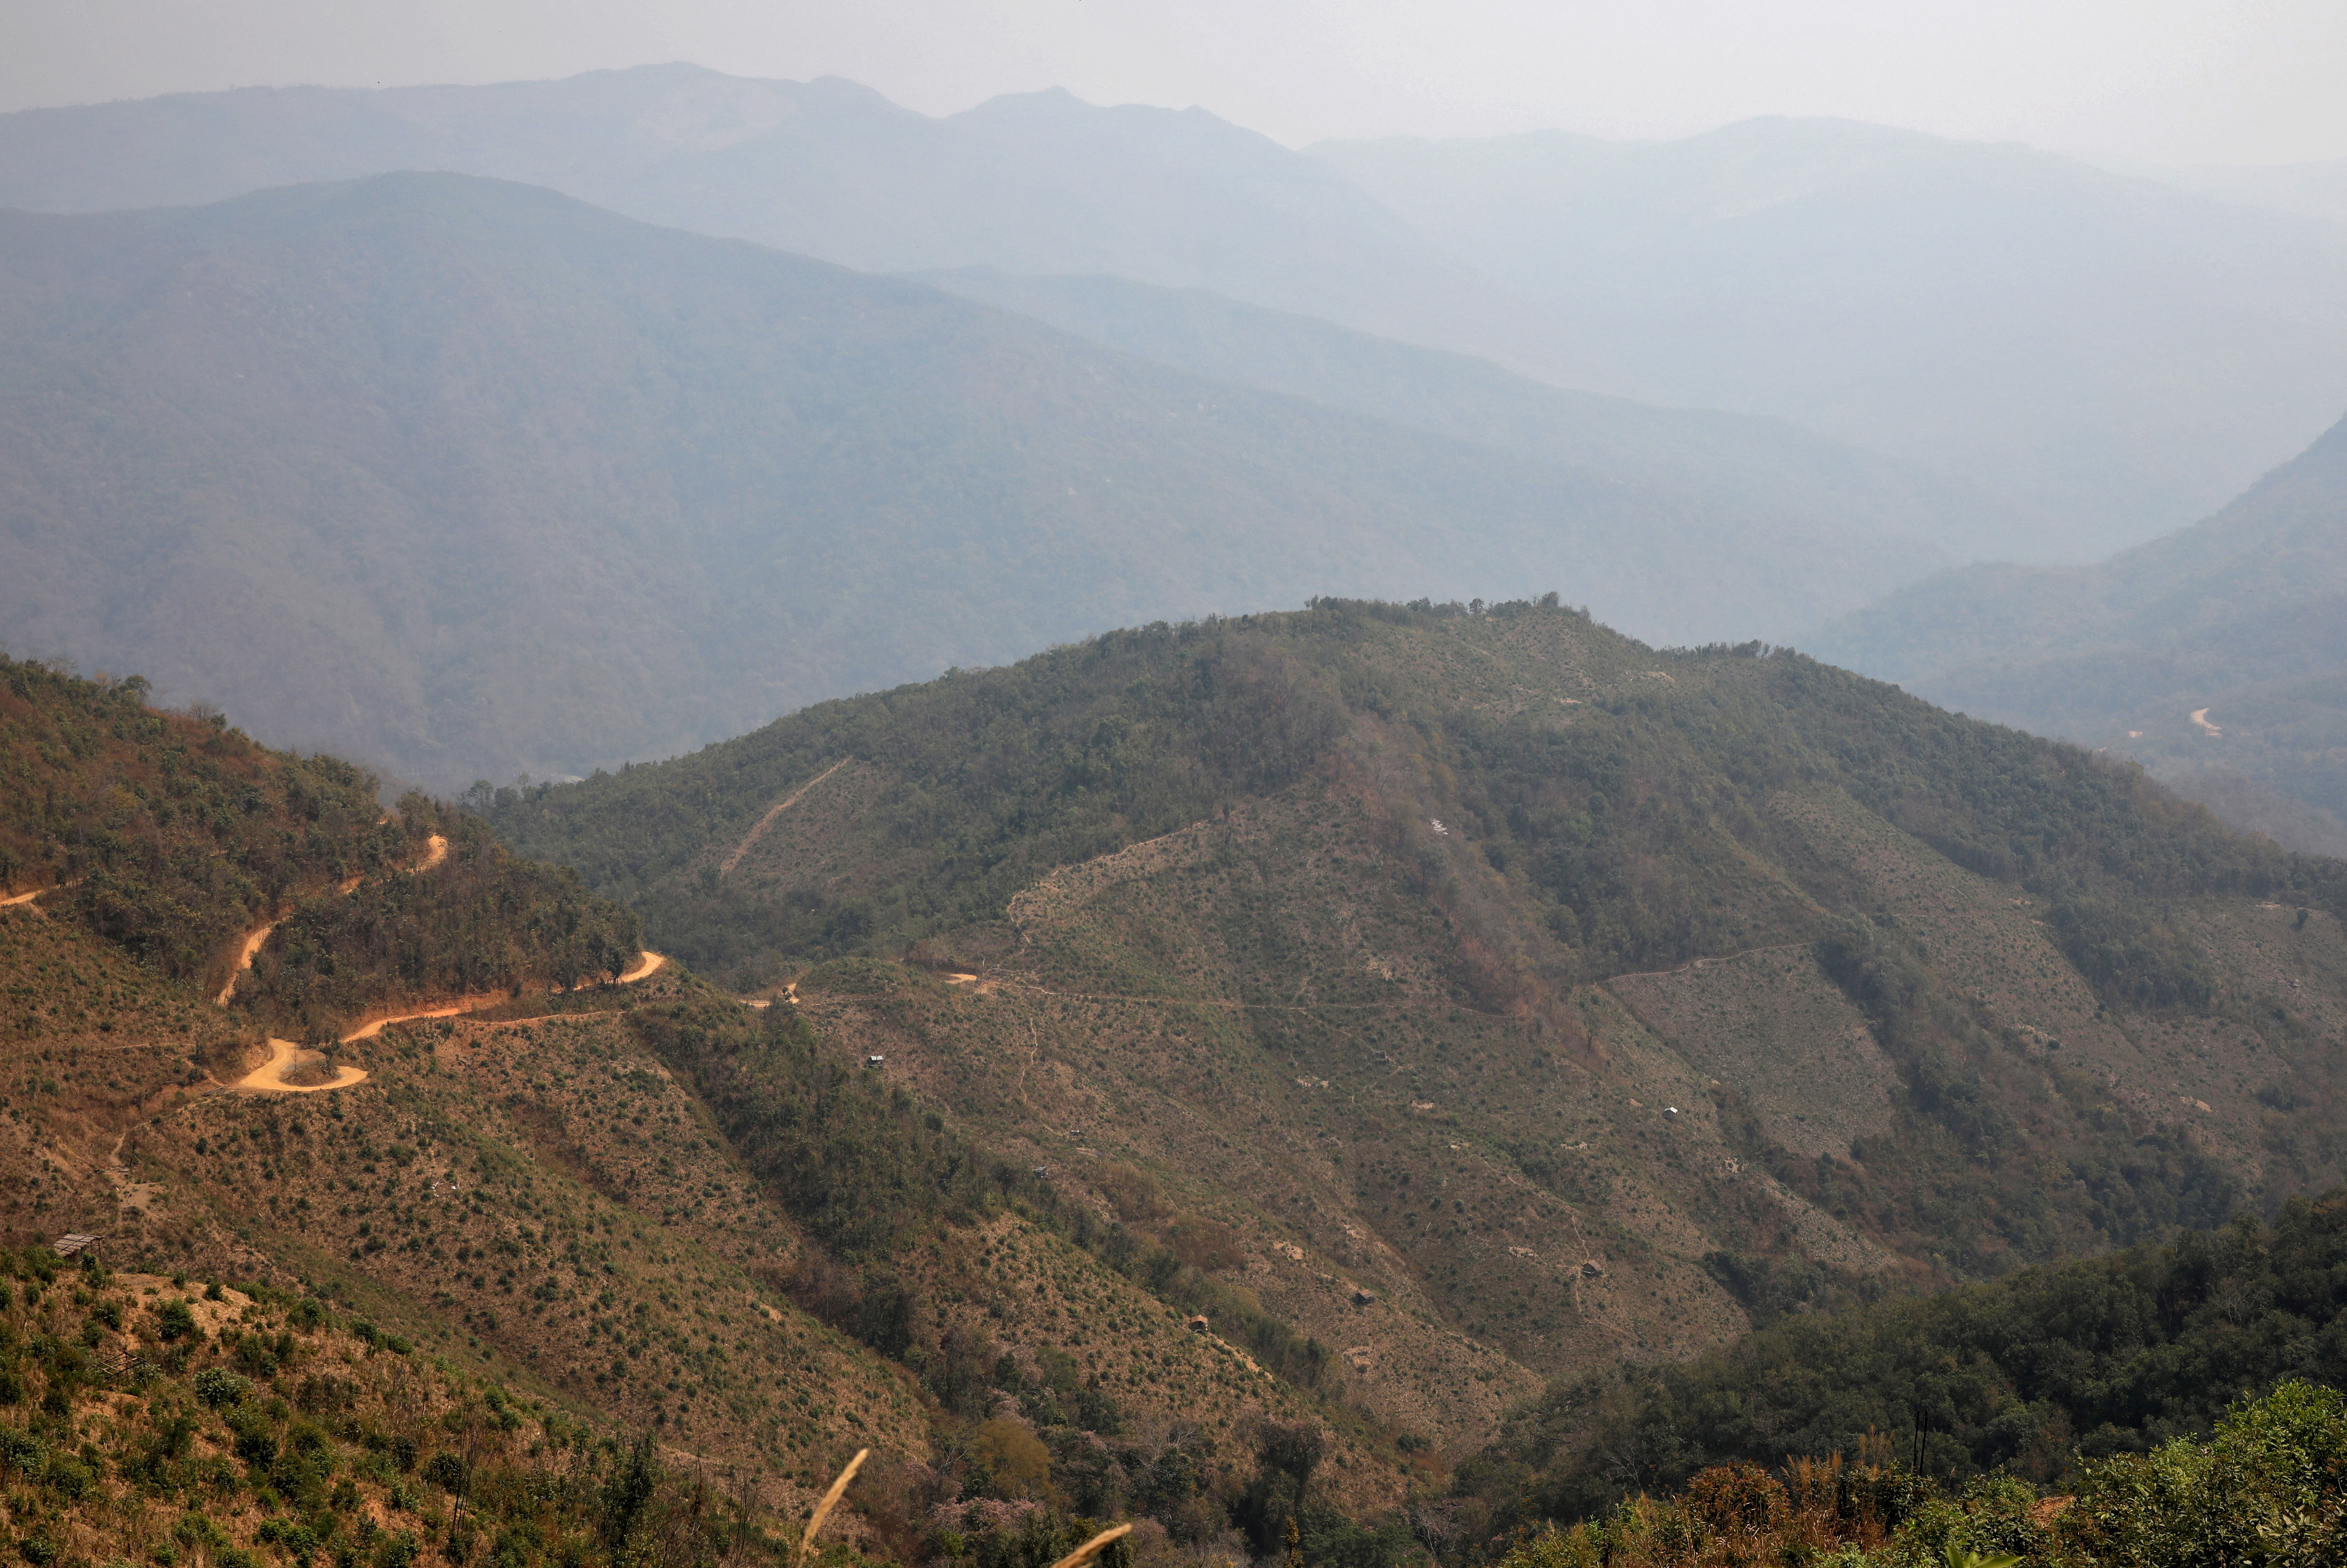 Mountain roads are pictured in the Champhai district of India's northeastern state of Mizoram